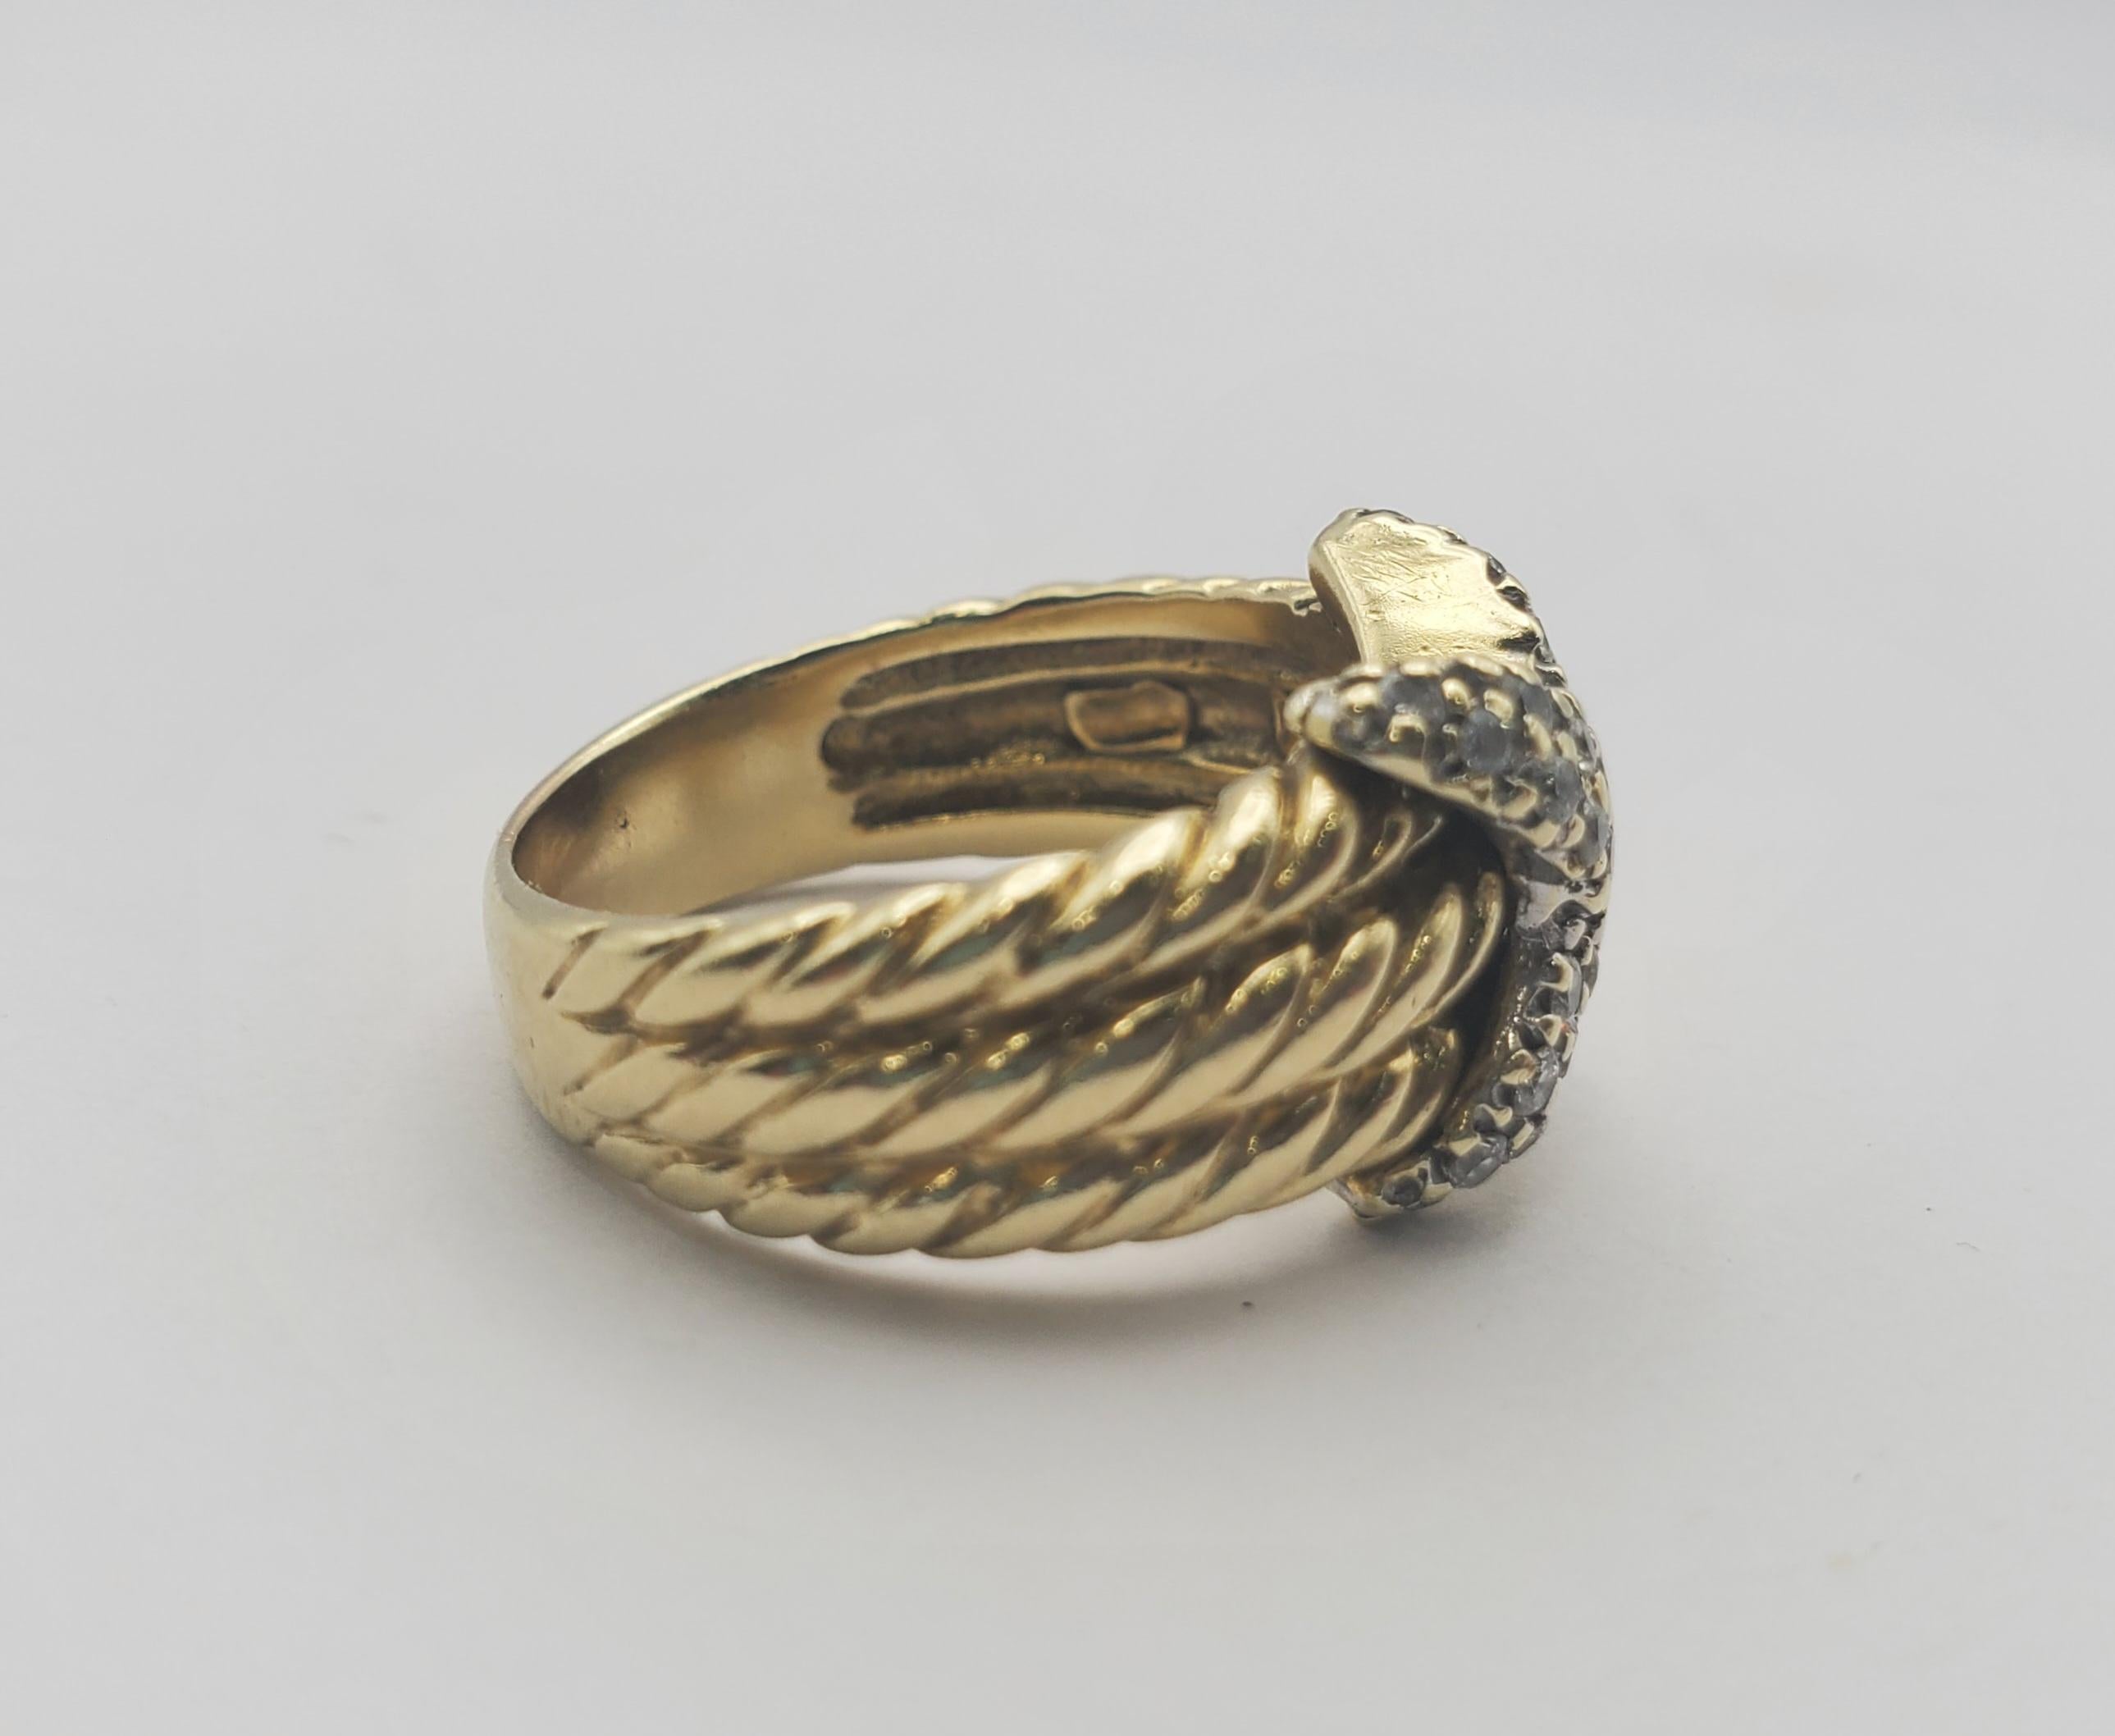 Stunning David Yurman 14k white and yellow cable X ring with round diamonds. The ring contains 33 round diamonds with a combined weight of 0.38tw. The diamonds are G-H in color and VS in clarity. This piece features the sculpted cable motif that is